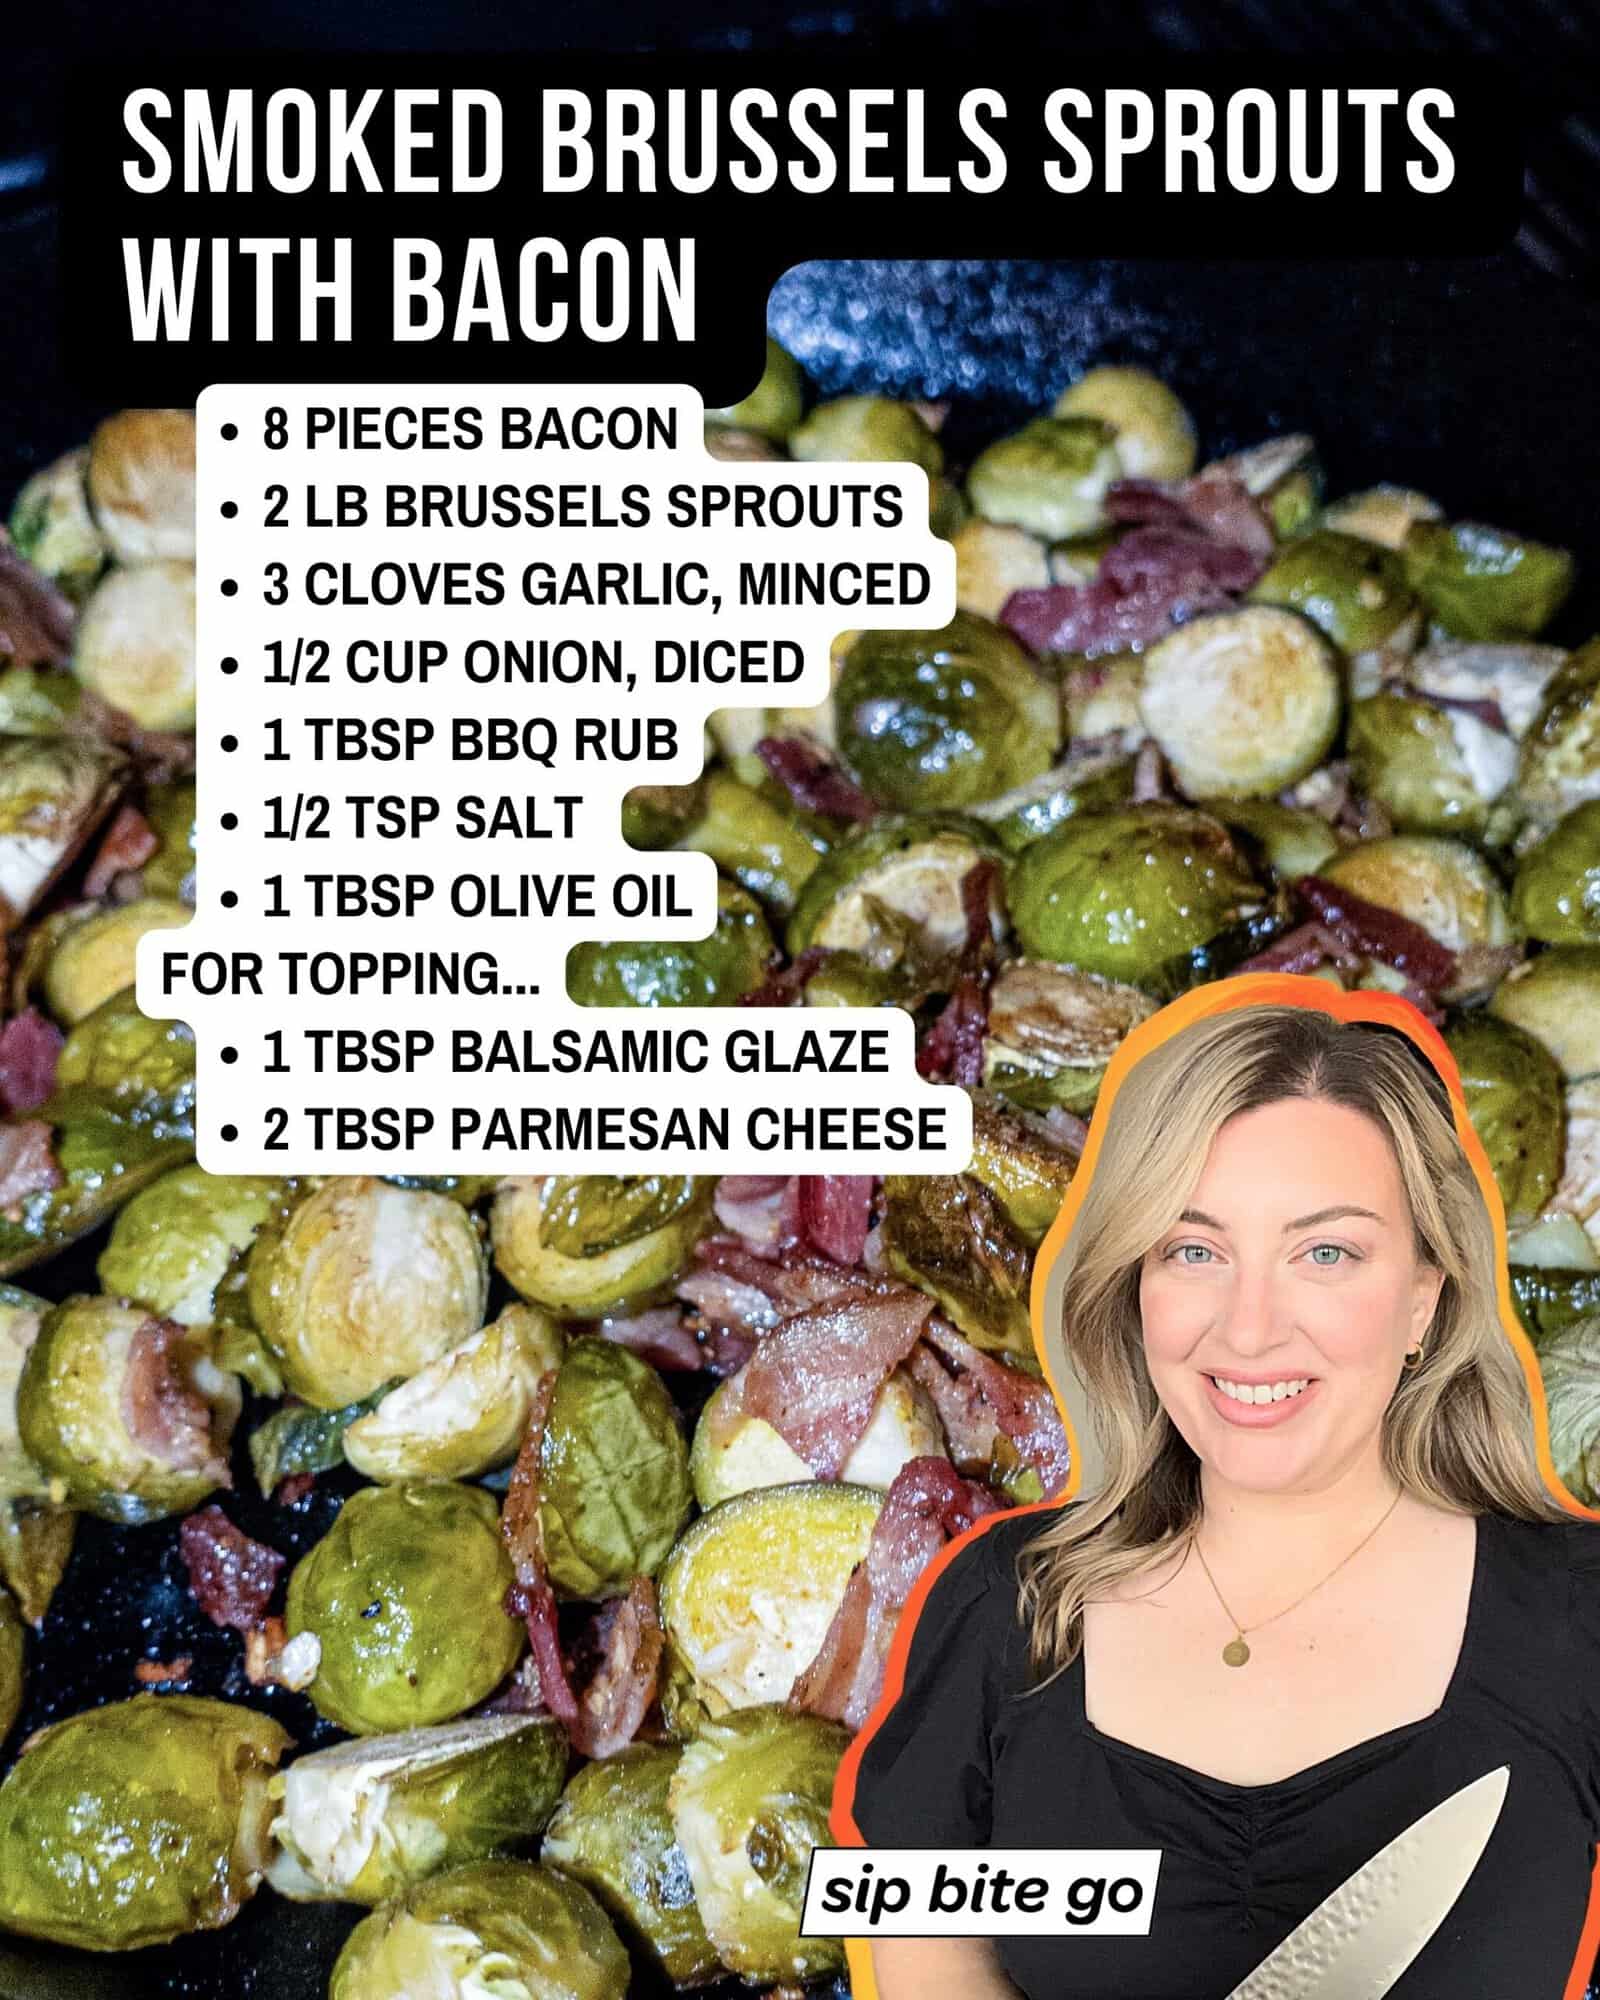 List of Traeger Smoked Brussels Sprouts Ingredients with image of recipe and jenna passaro